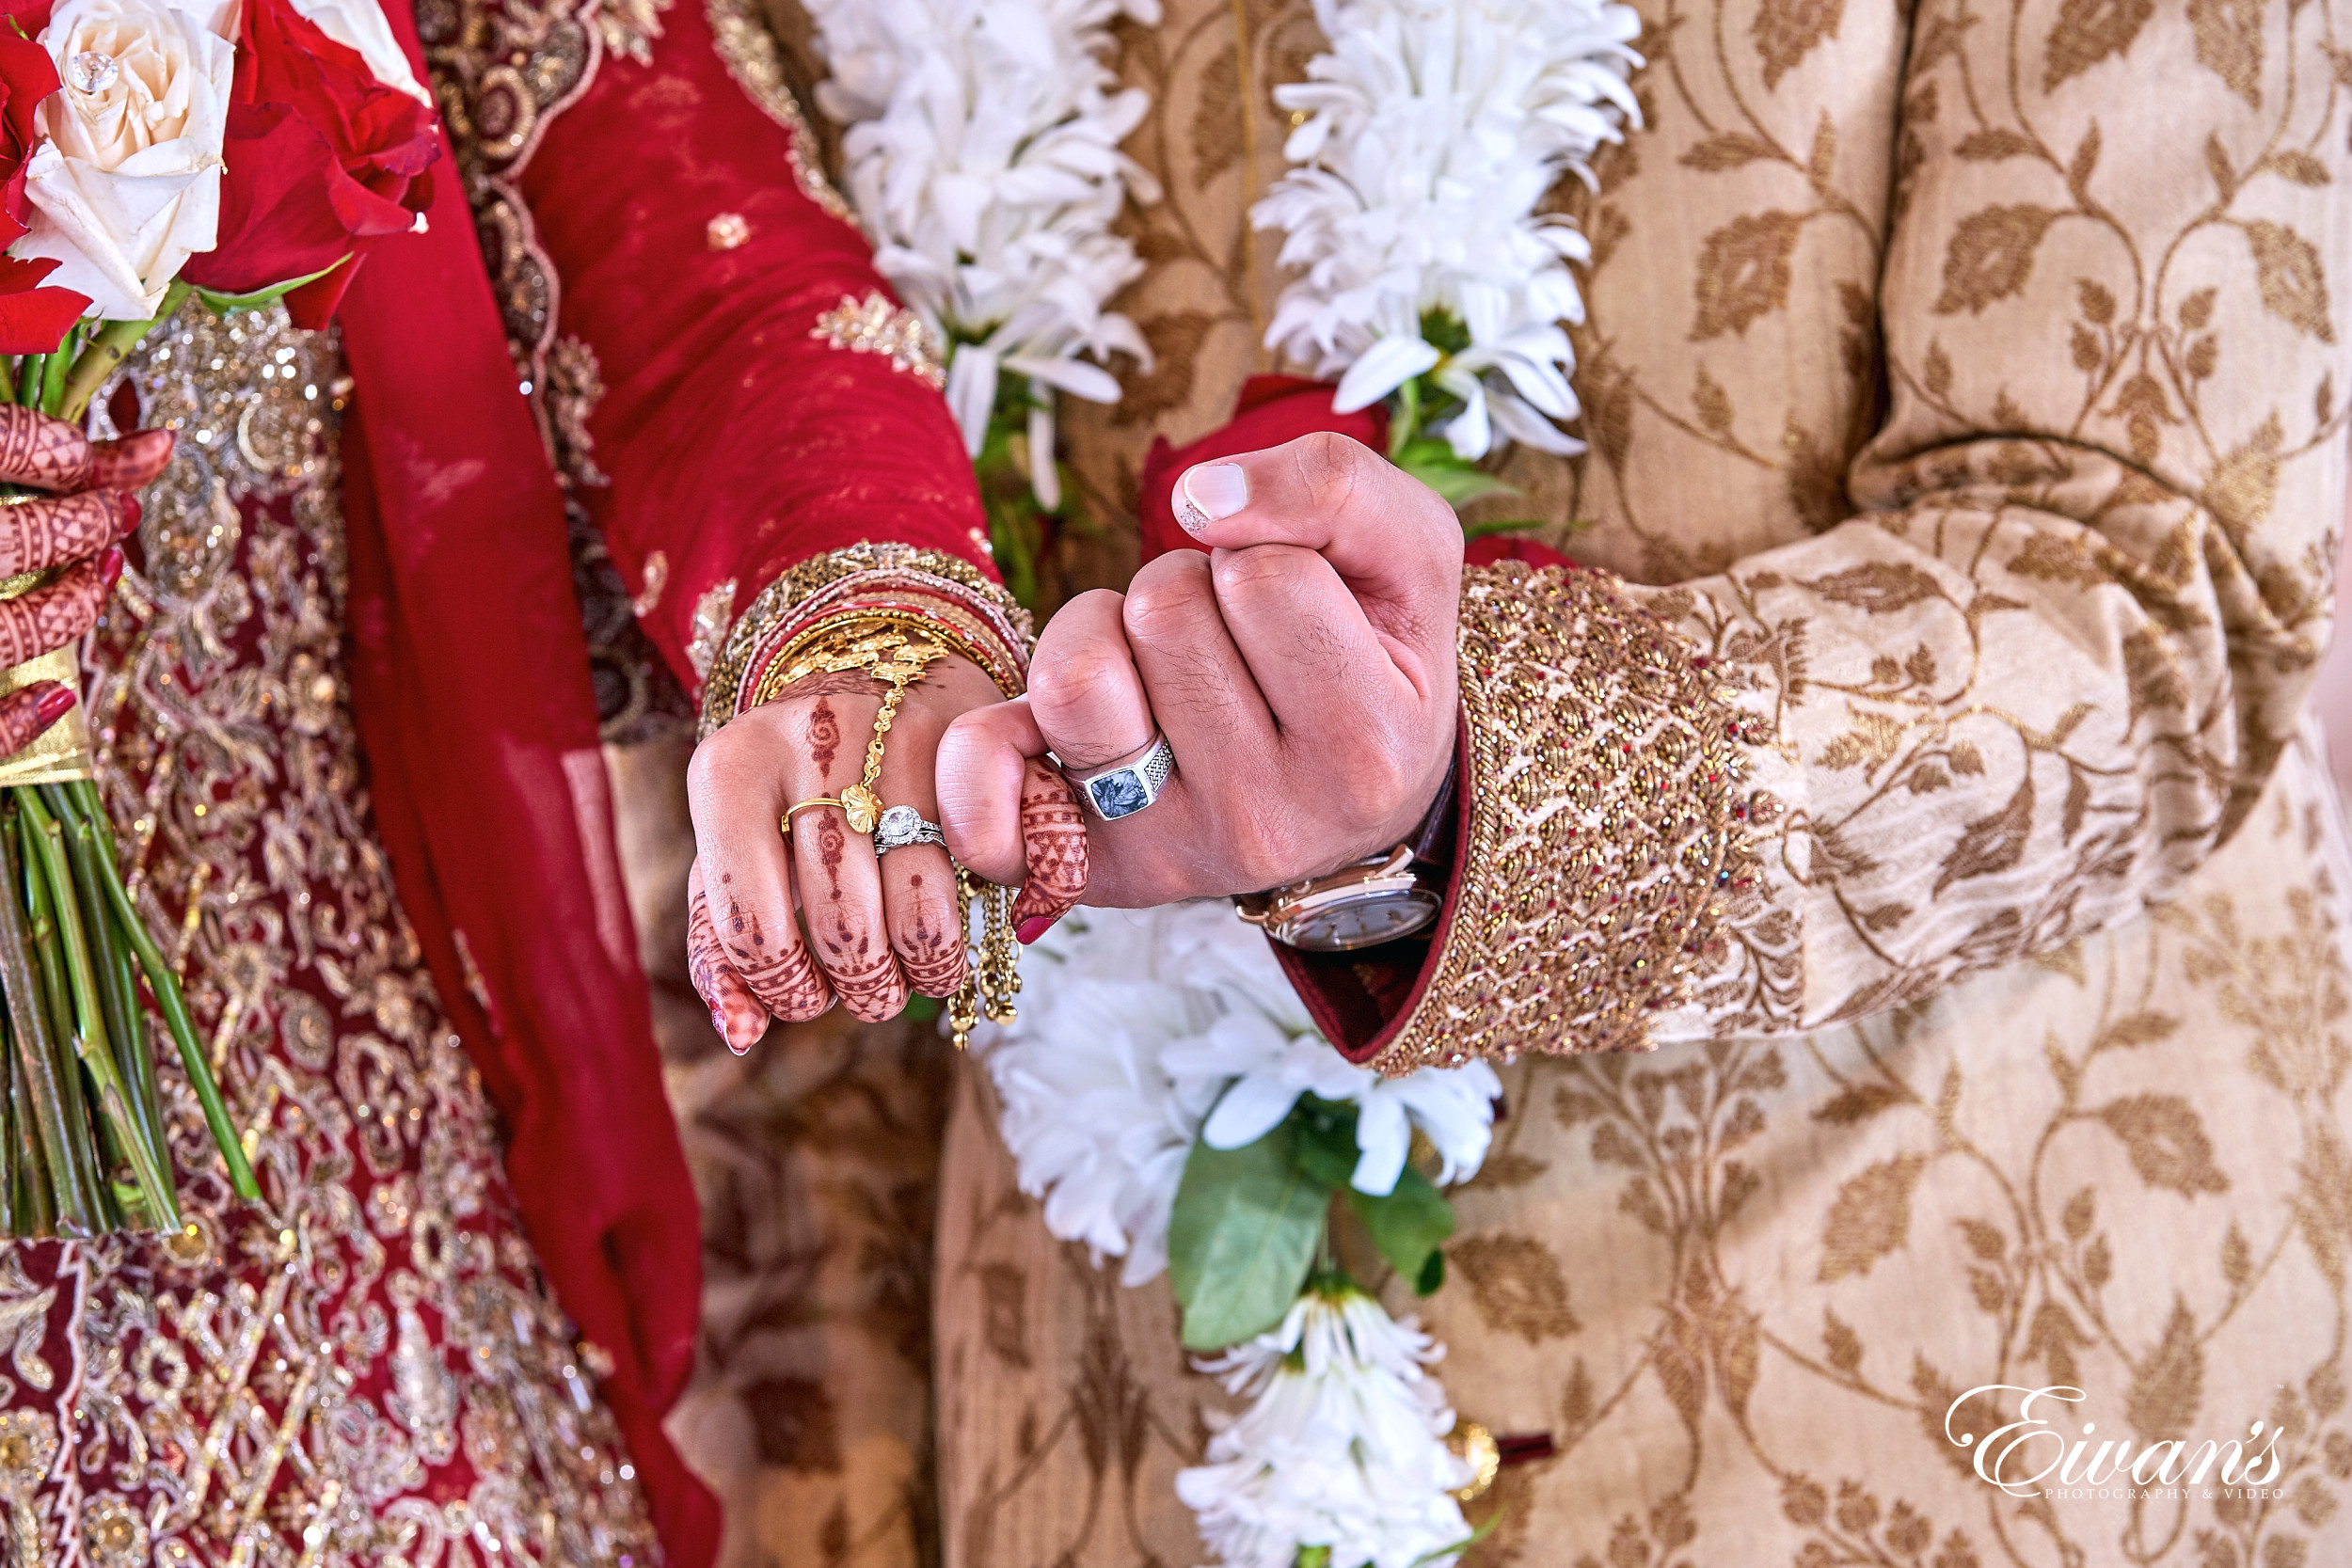 9 Detailed Indian Wedding Traditions 2020 You Need To Know